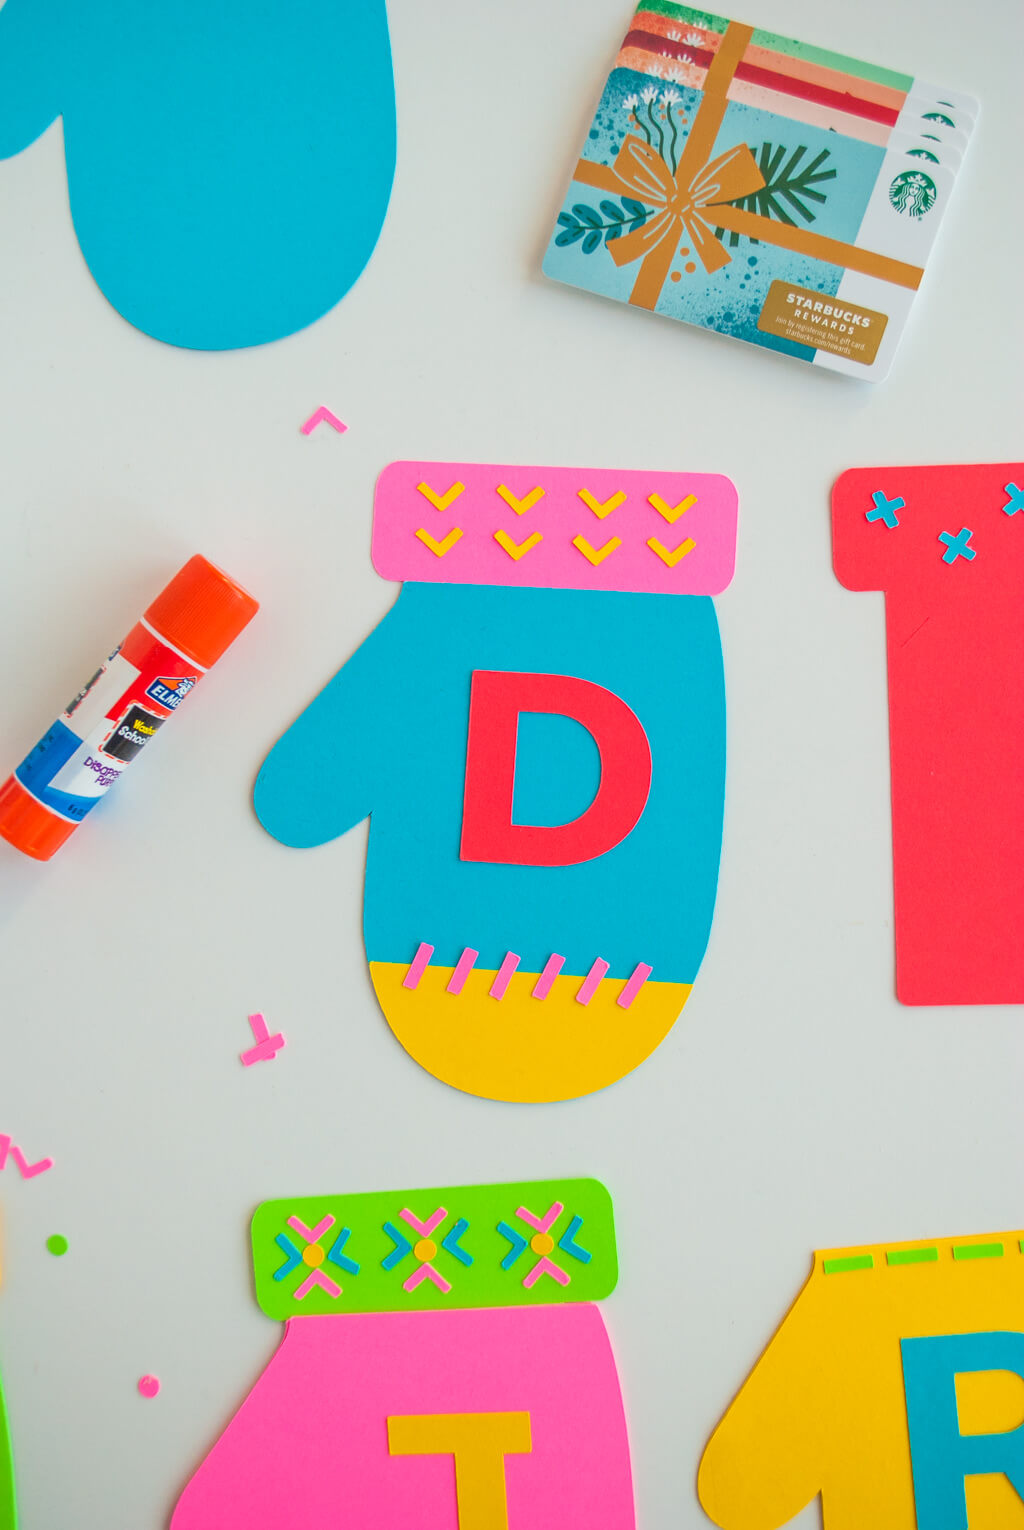 How to make DIY gift card holders in the shape of mittens